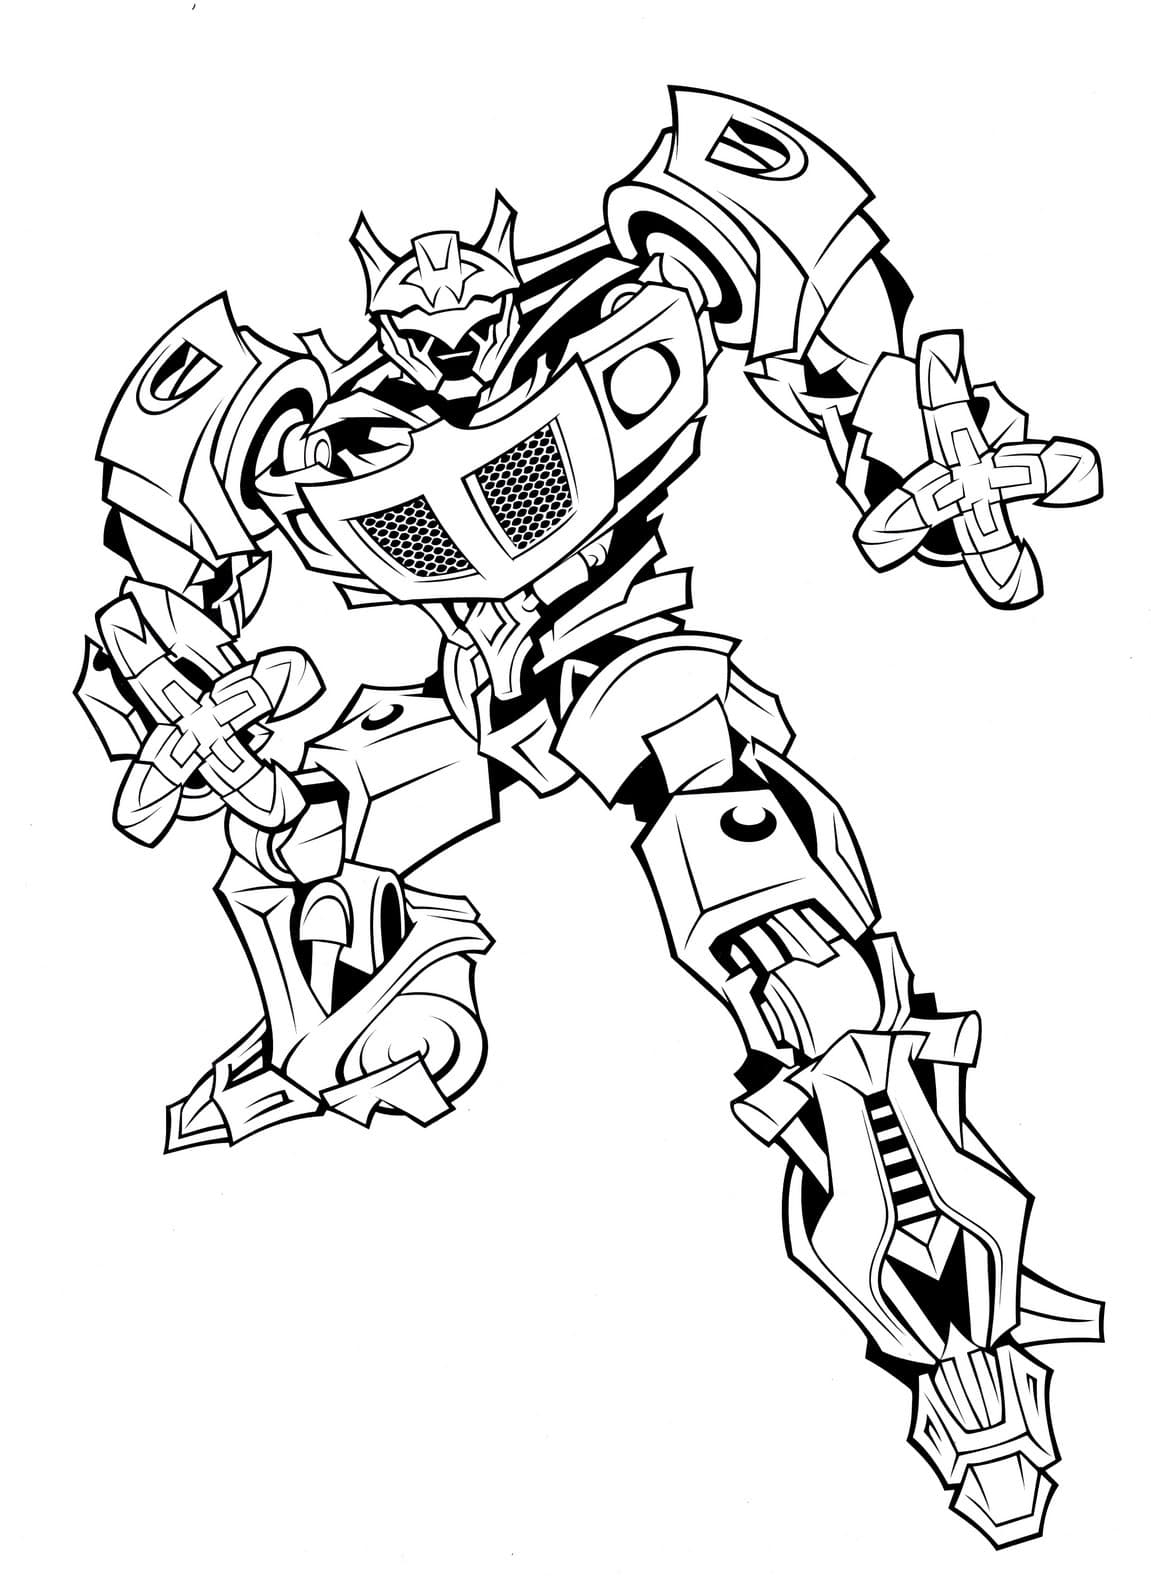 Transformers Coloring Pages. Print Or Download For Free For Your Boys! intérieur Coloriage Transformers Megatron